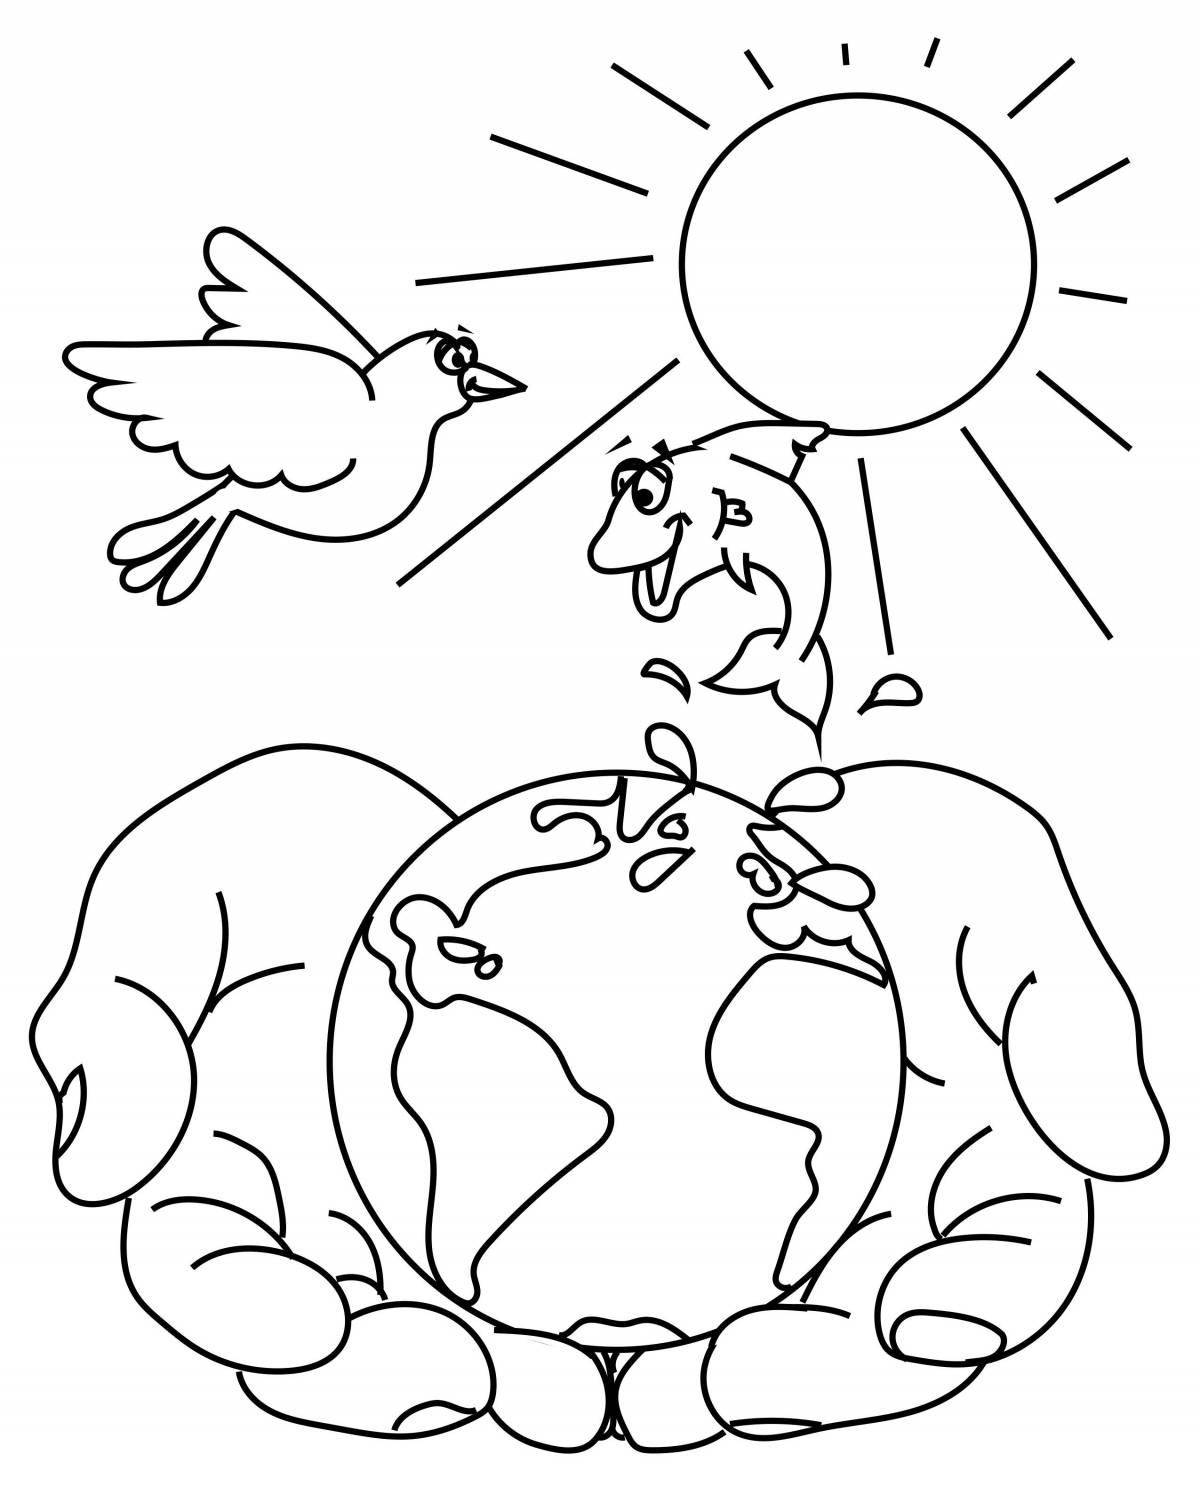 Coloring book glowing world peace without war